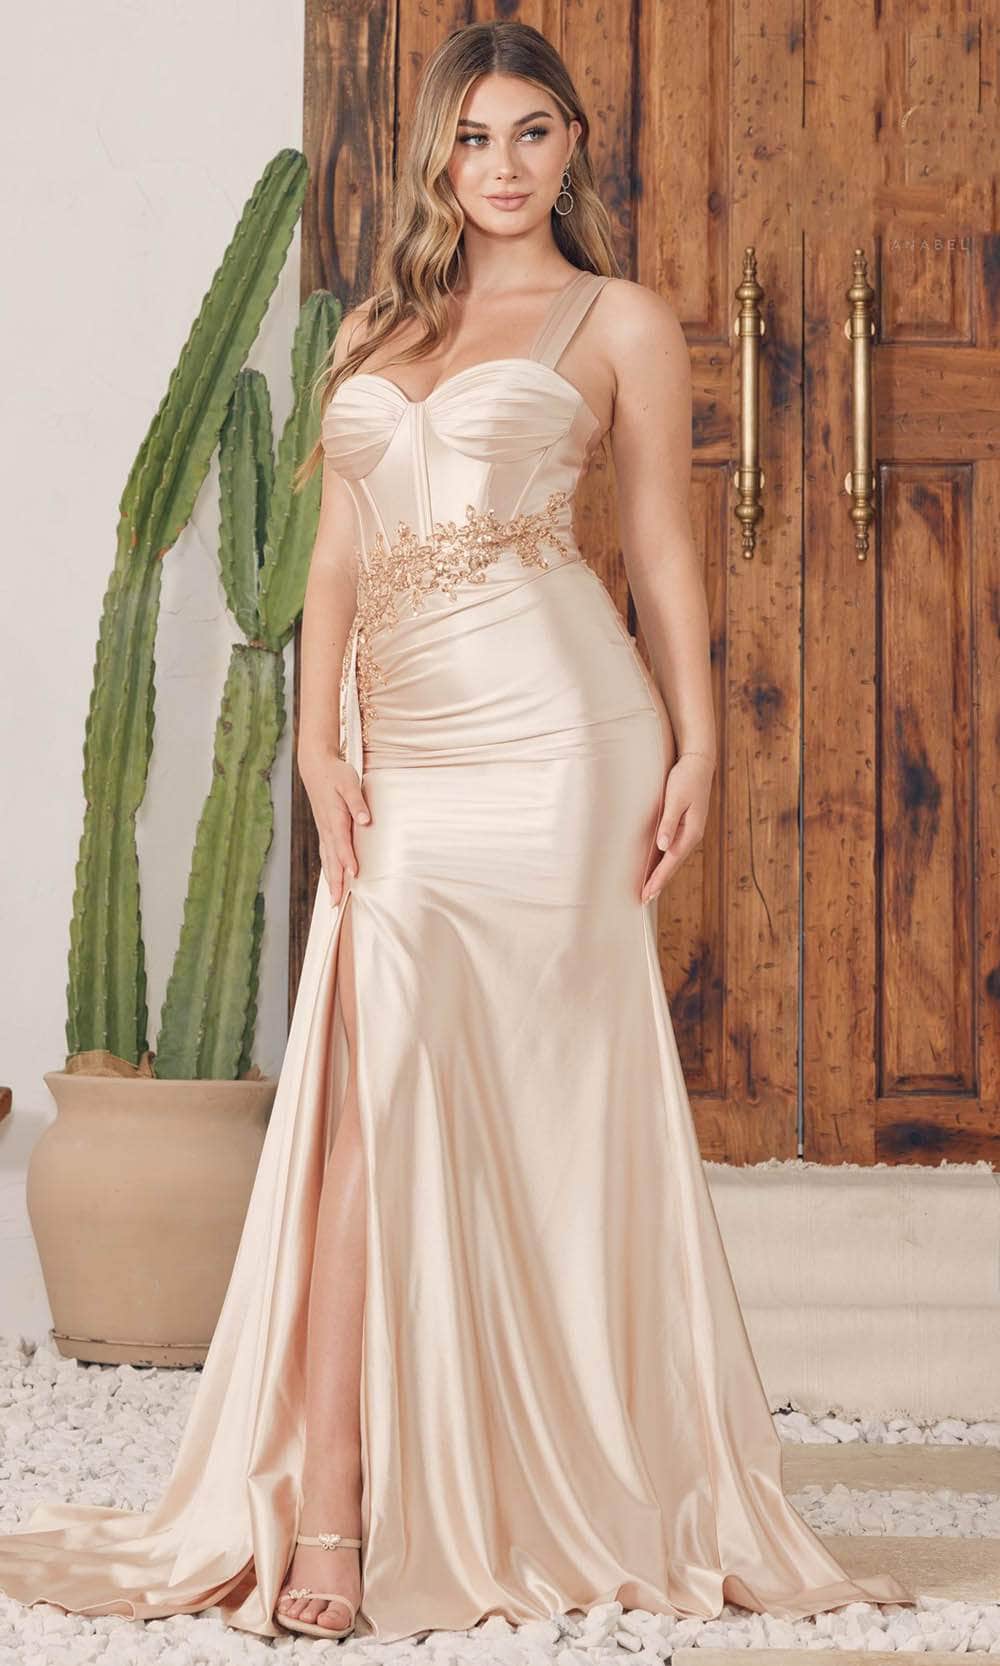 Nox Anabel E1239 - Sweetheart Bustier Satin Evening Gown
